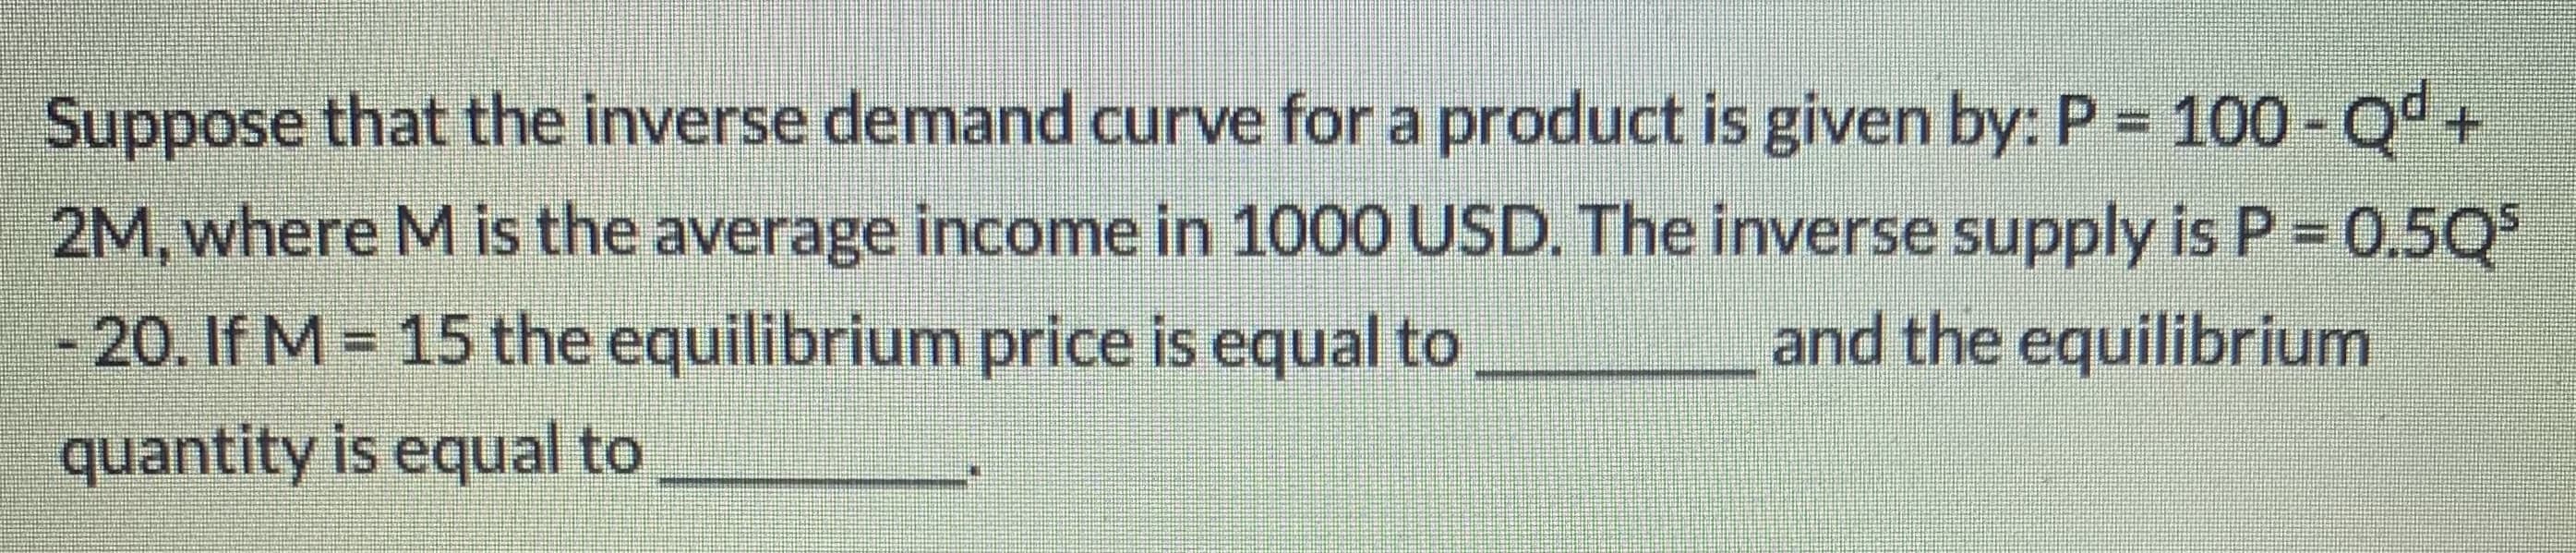 Suppose that the inverse demand curve for a product is given by: P = 100 -Q°.
+.
2M, where M is the average income in 1000 USD. The inverse supply is P = 0.5Q
- 20. If M = 15 the equilibrium price is equal to
and the equilibrium
%3D
quantity is equal to
